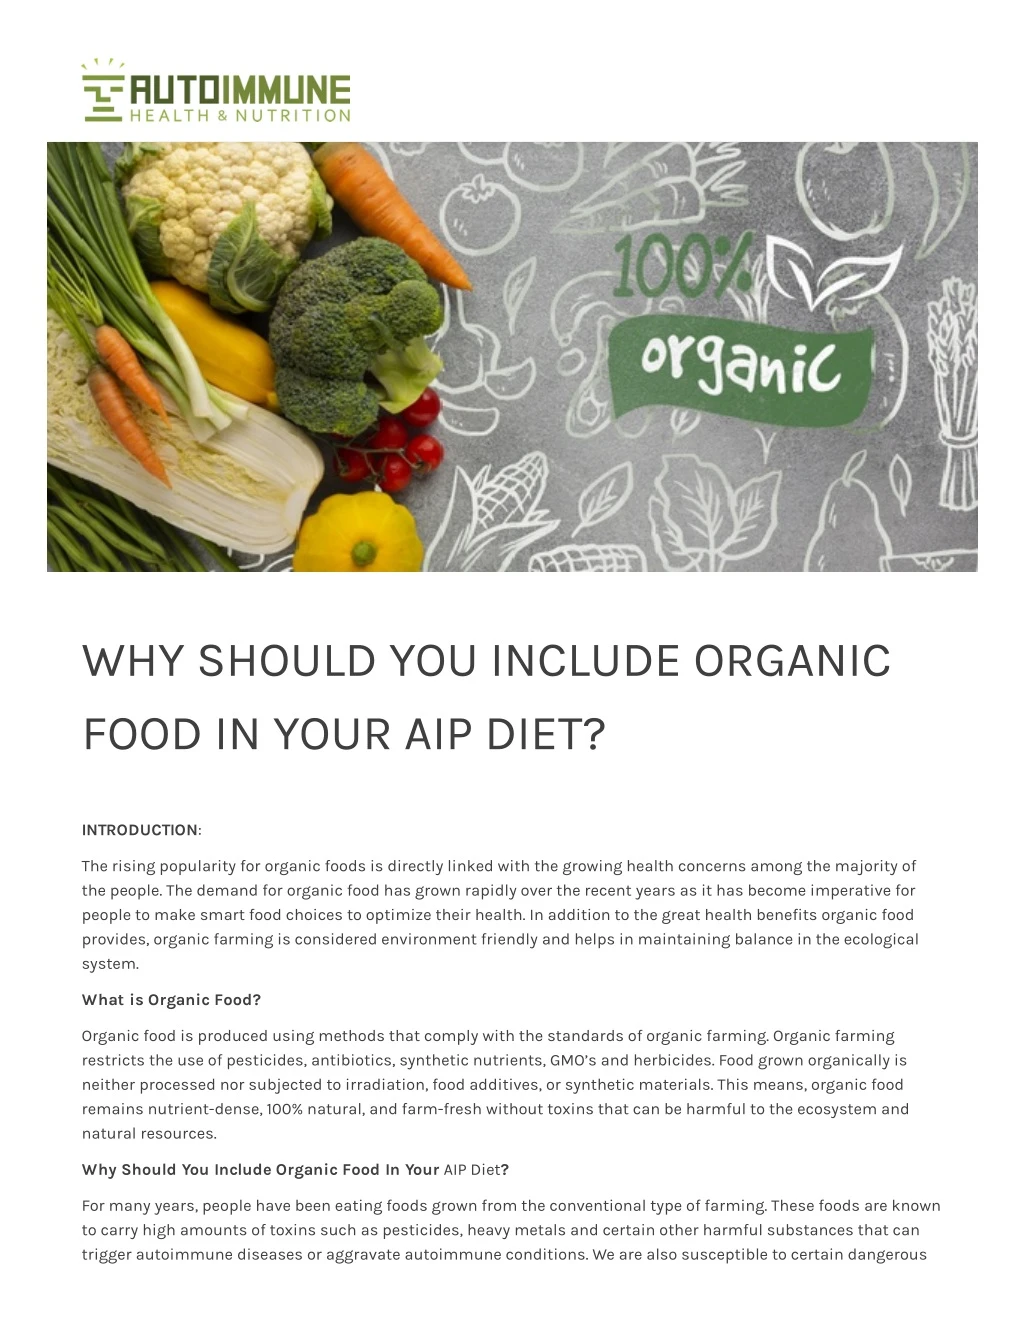 why should you include organic food in your